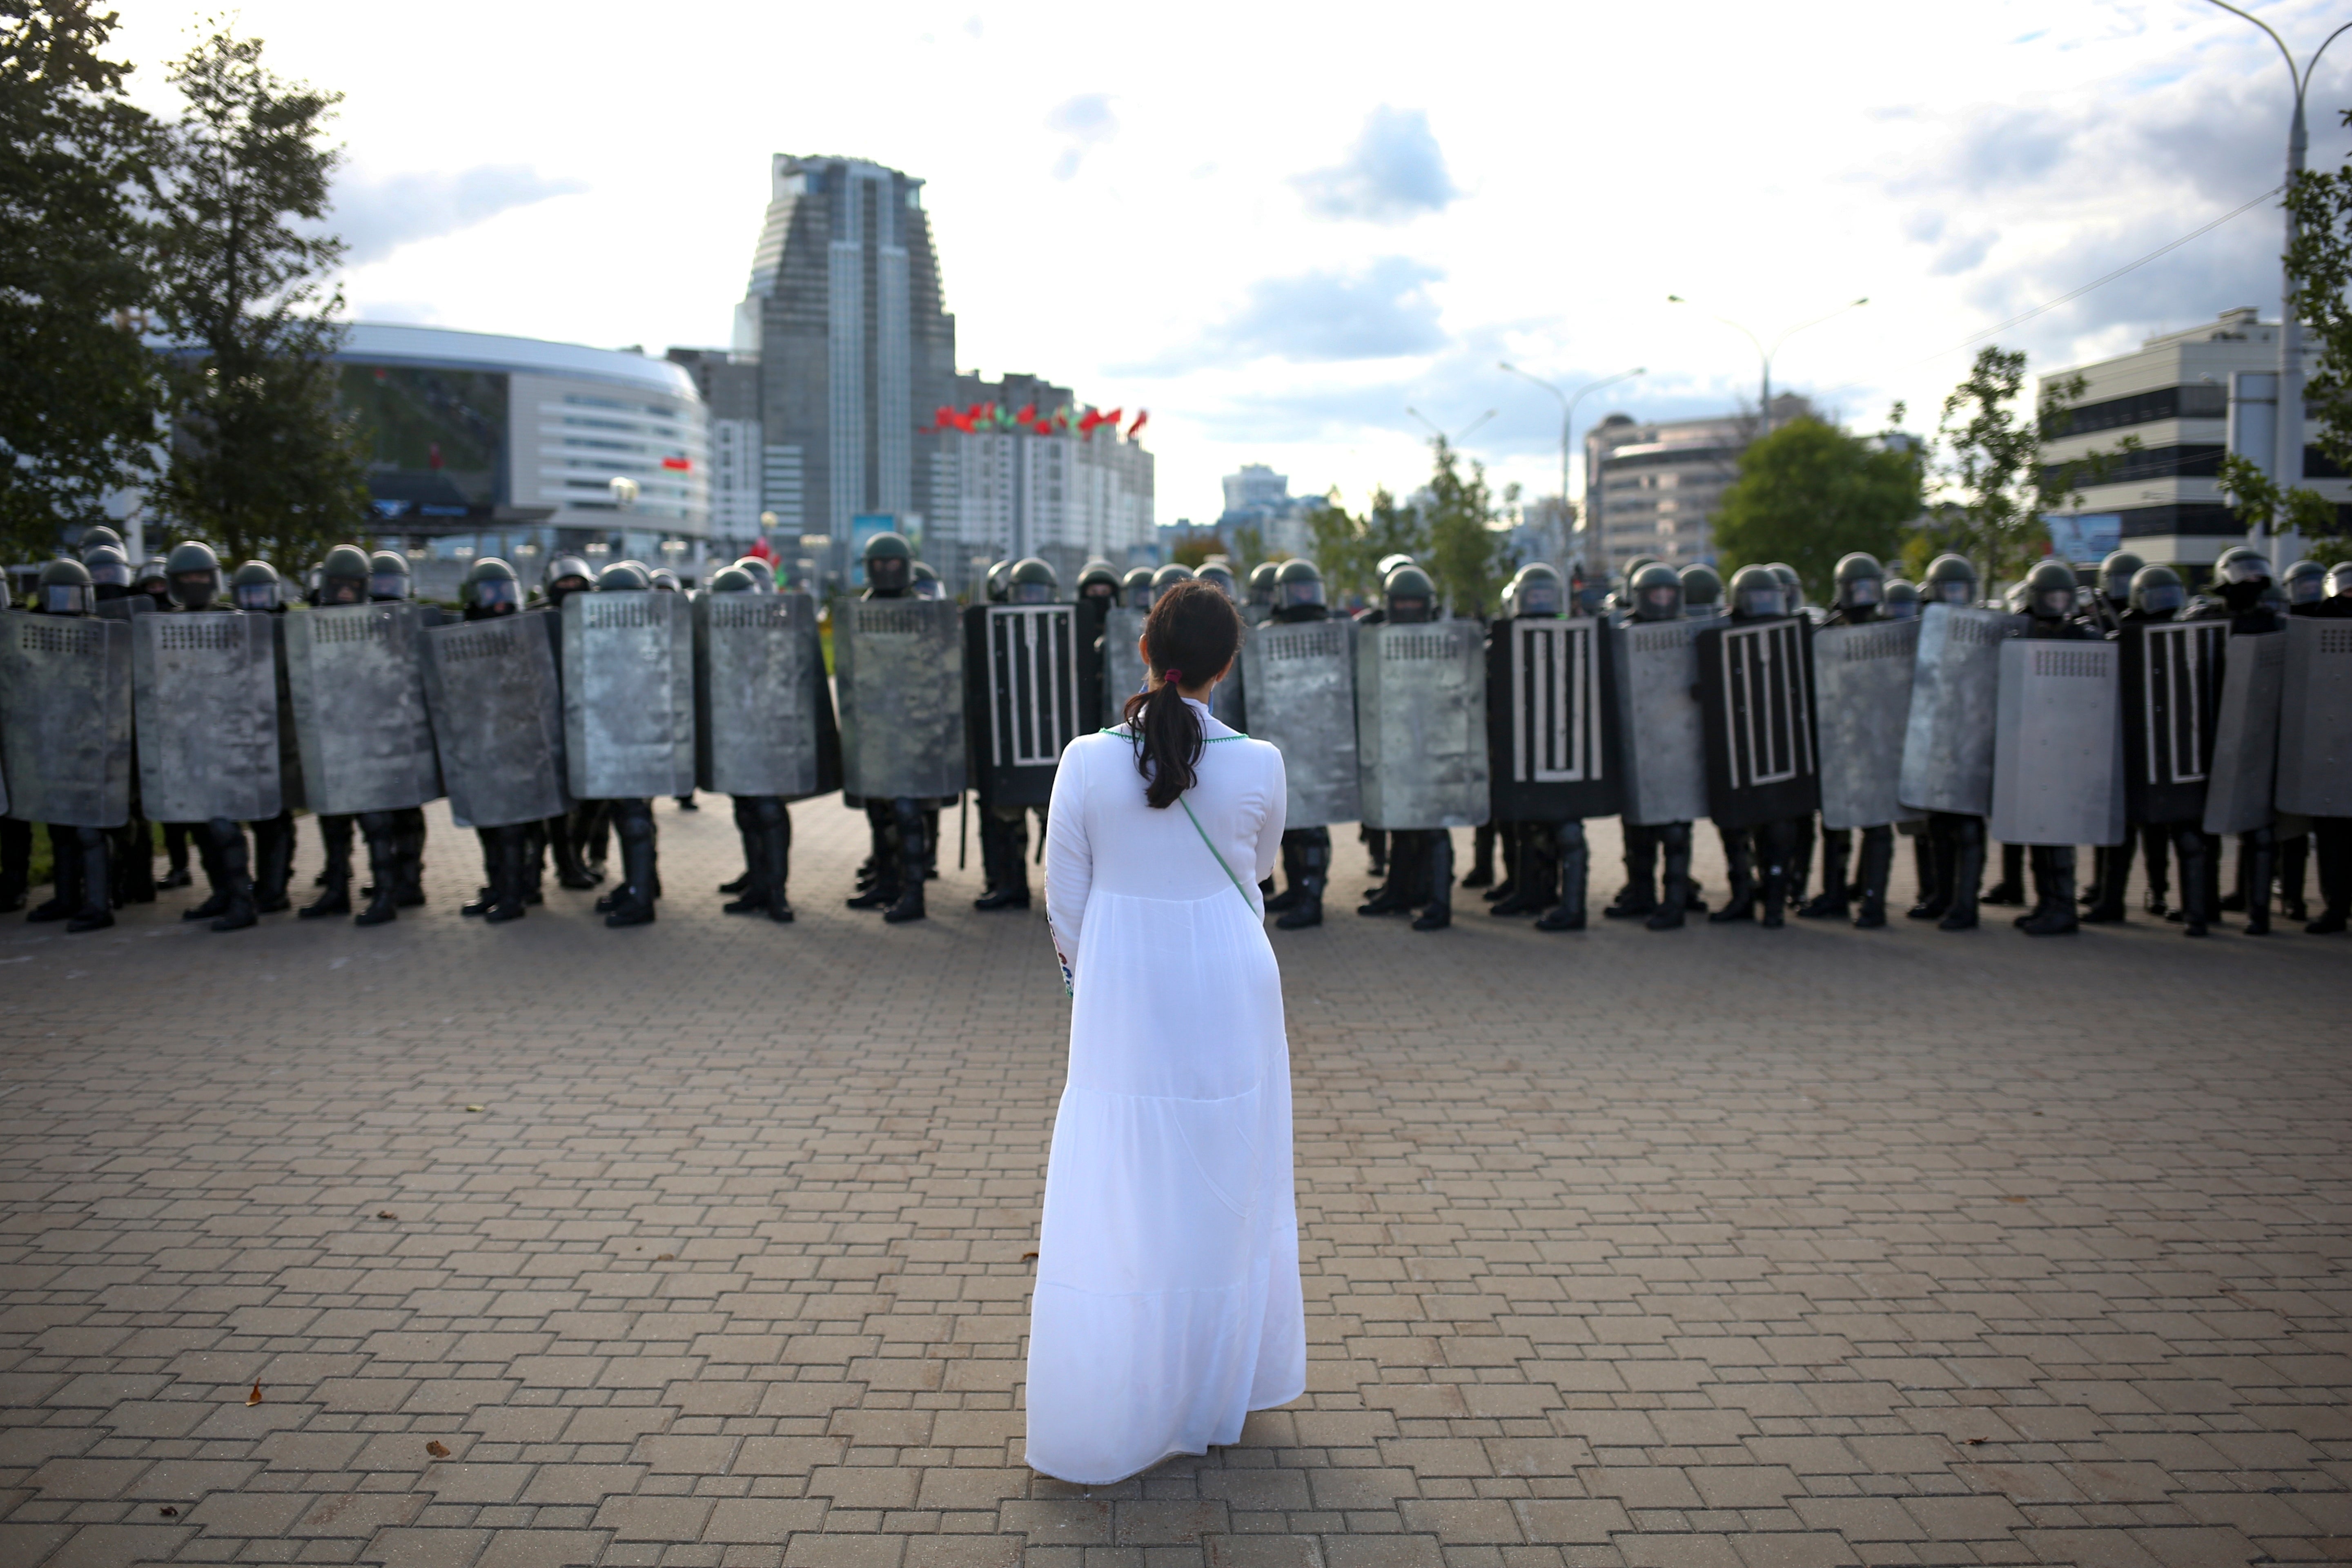 A woman wearing white, stands in front of a riot police line during a Belarusian opposition supporters' rally protesting the official presidential election results in Minsk, Belarus, 13 September 2020